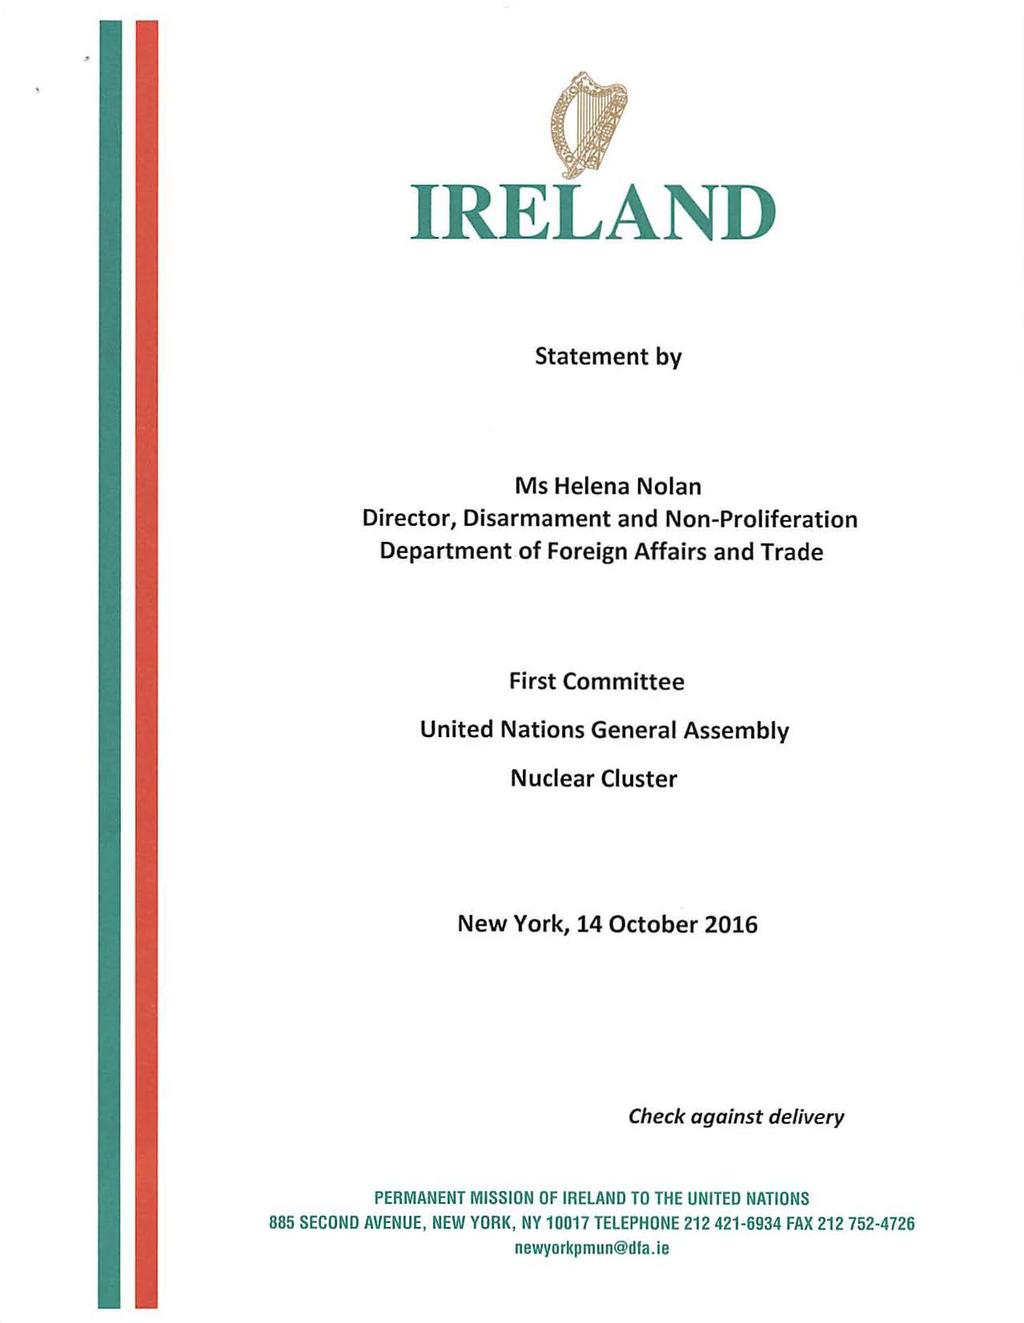 IRELAND Statement by Ms Helena Nolan Director, Disarmament and Non-Proliferation Department of Foreign Affairs and Trade First Committee United Nations General Assembly Nuclear Cluster New